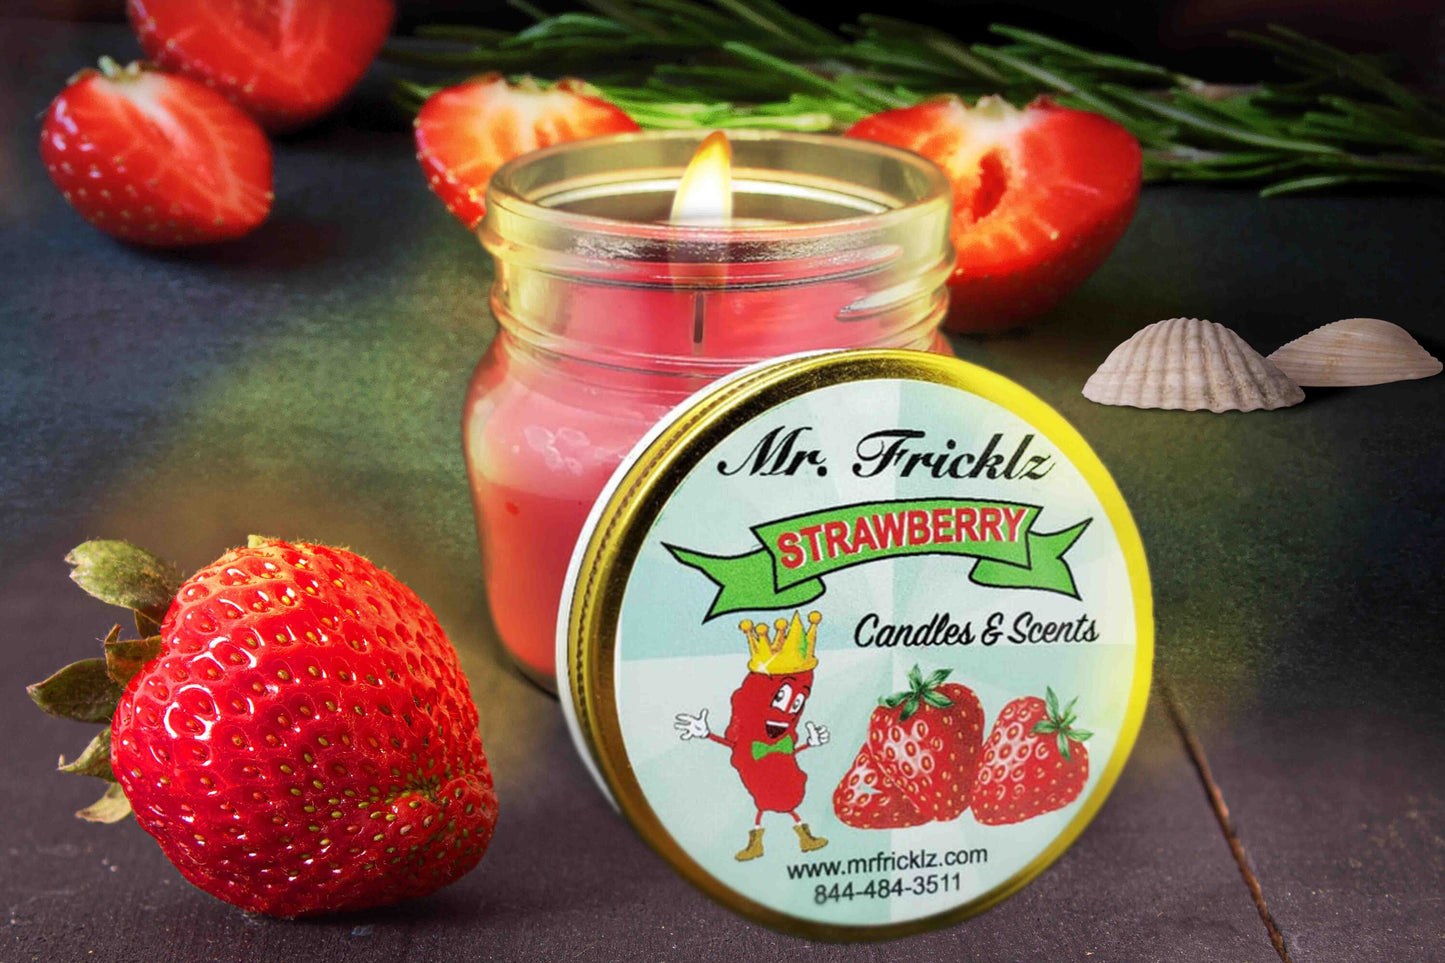 Candle - Strawberry